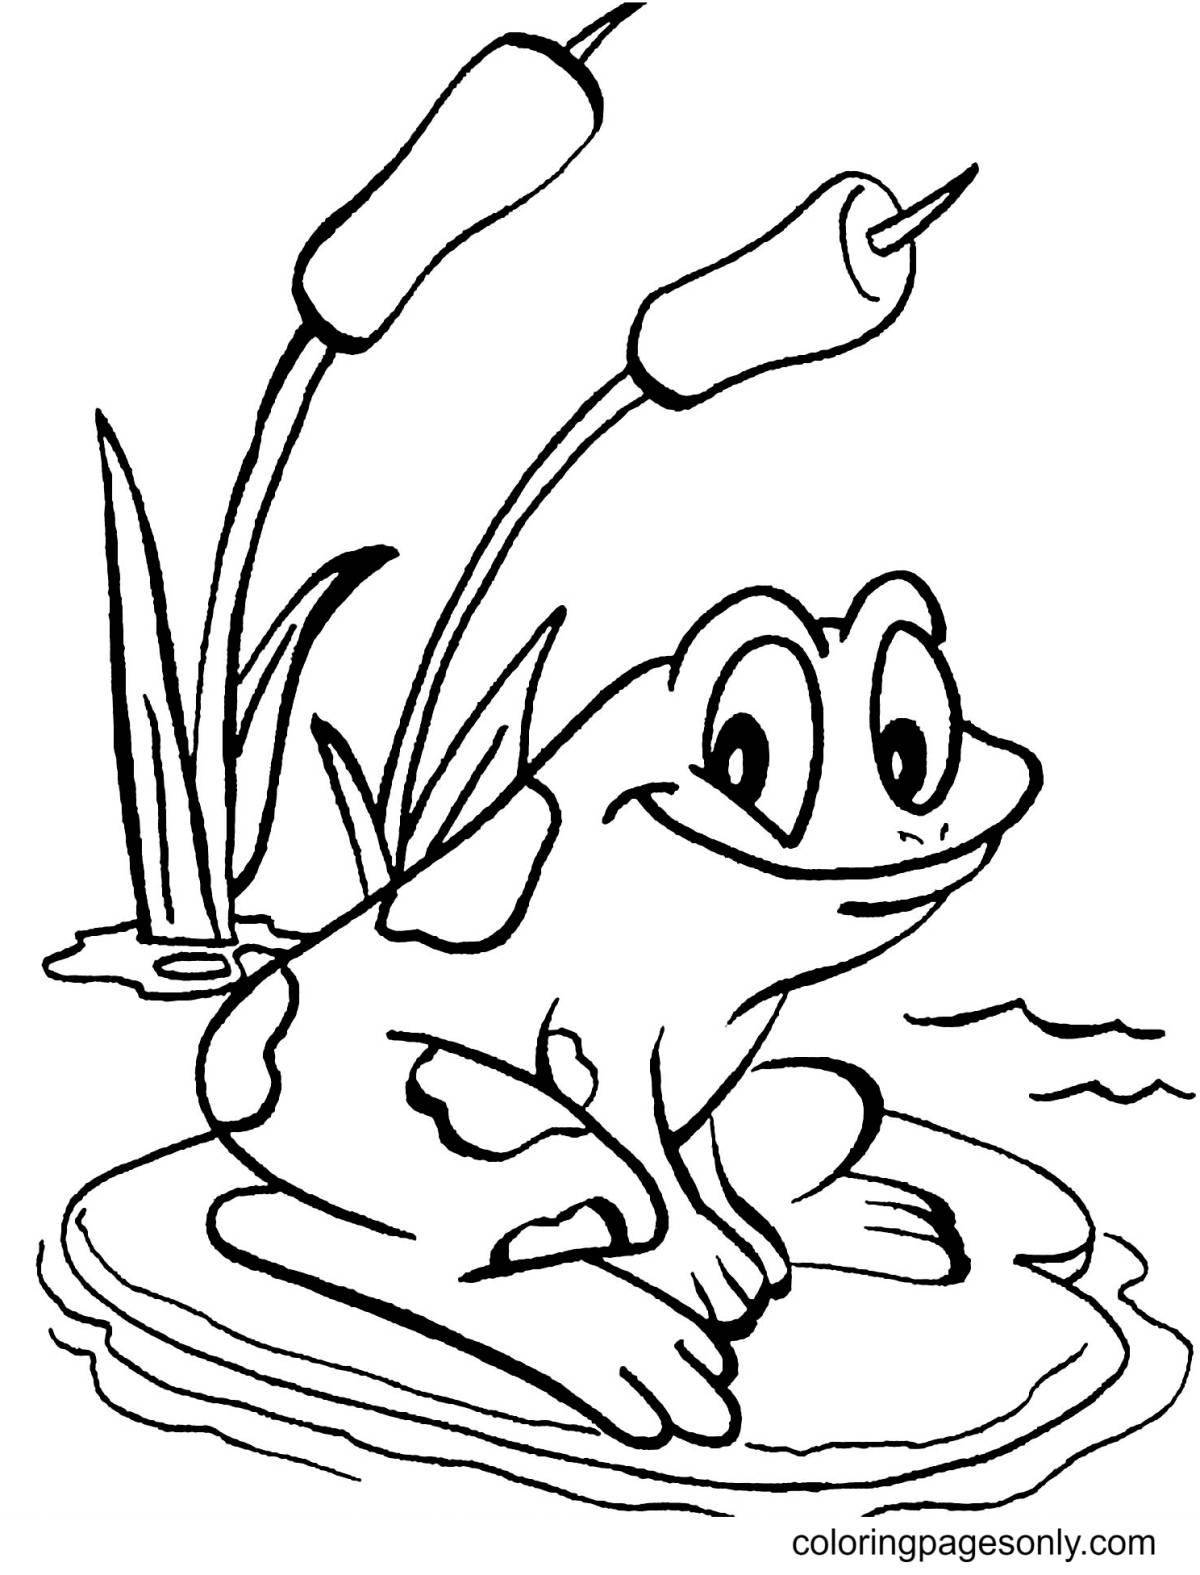 A fun travel frog coloring book for kids